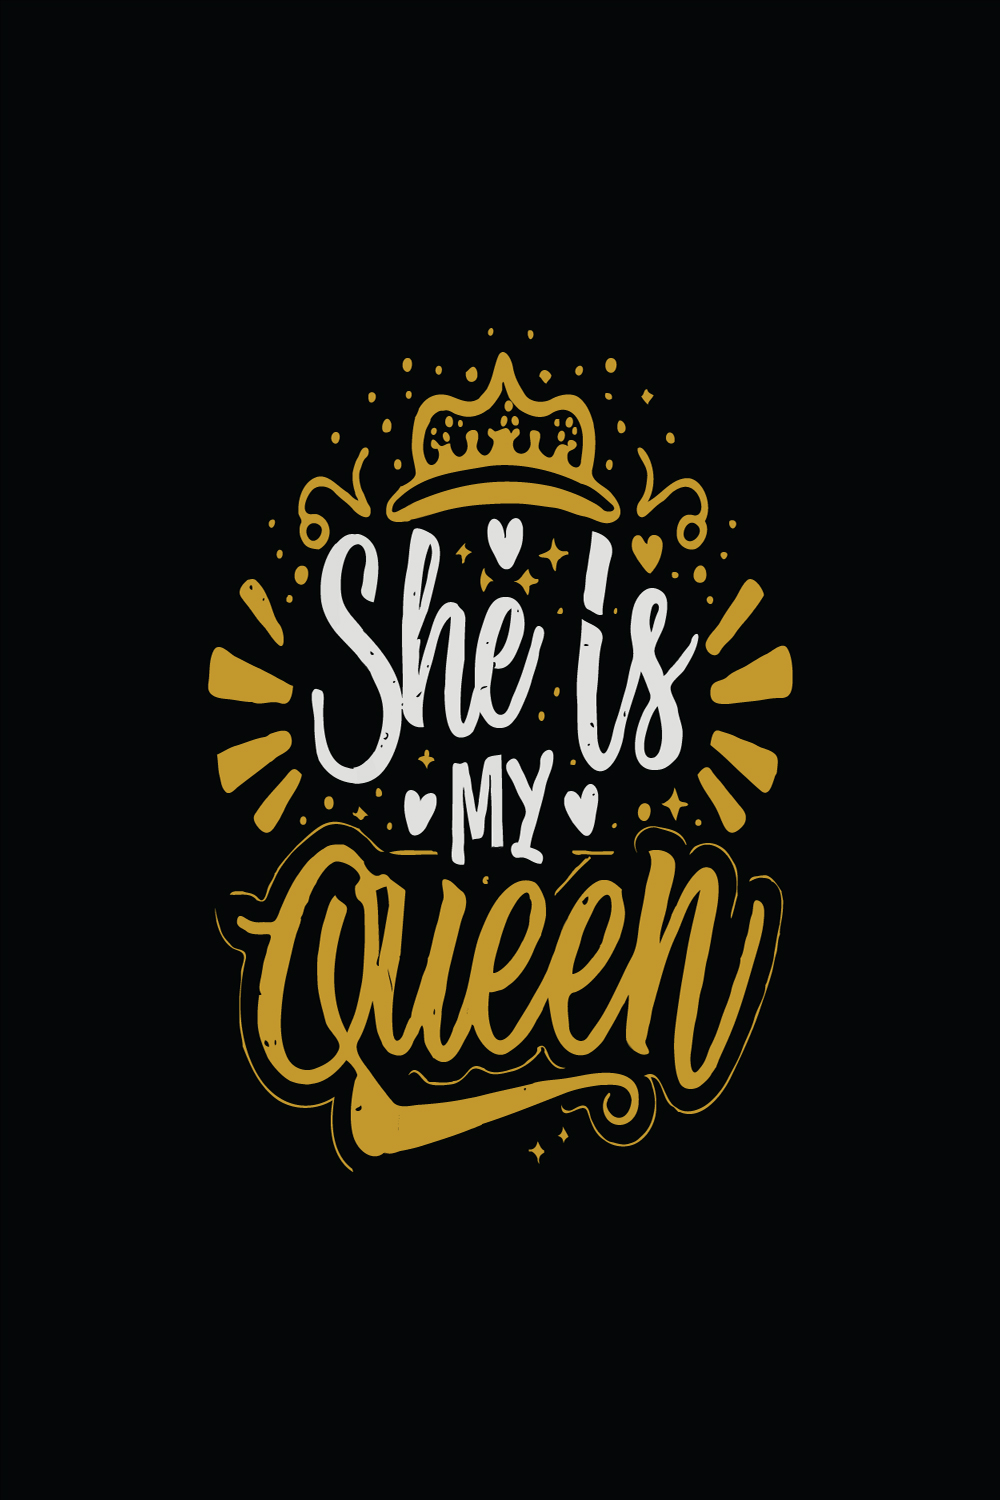 She is my Queen vector illustration Fun text for t-shirt print and social media pinterest preview image.